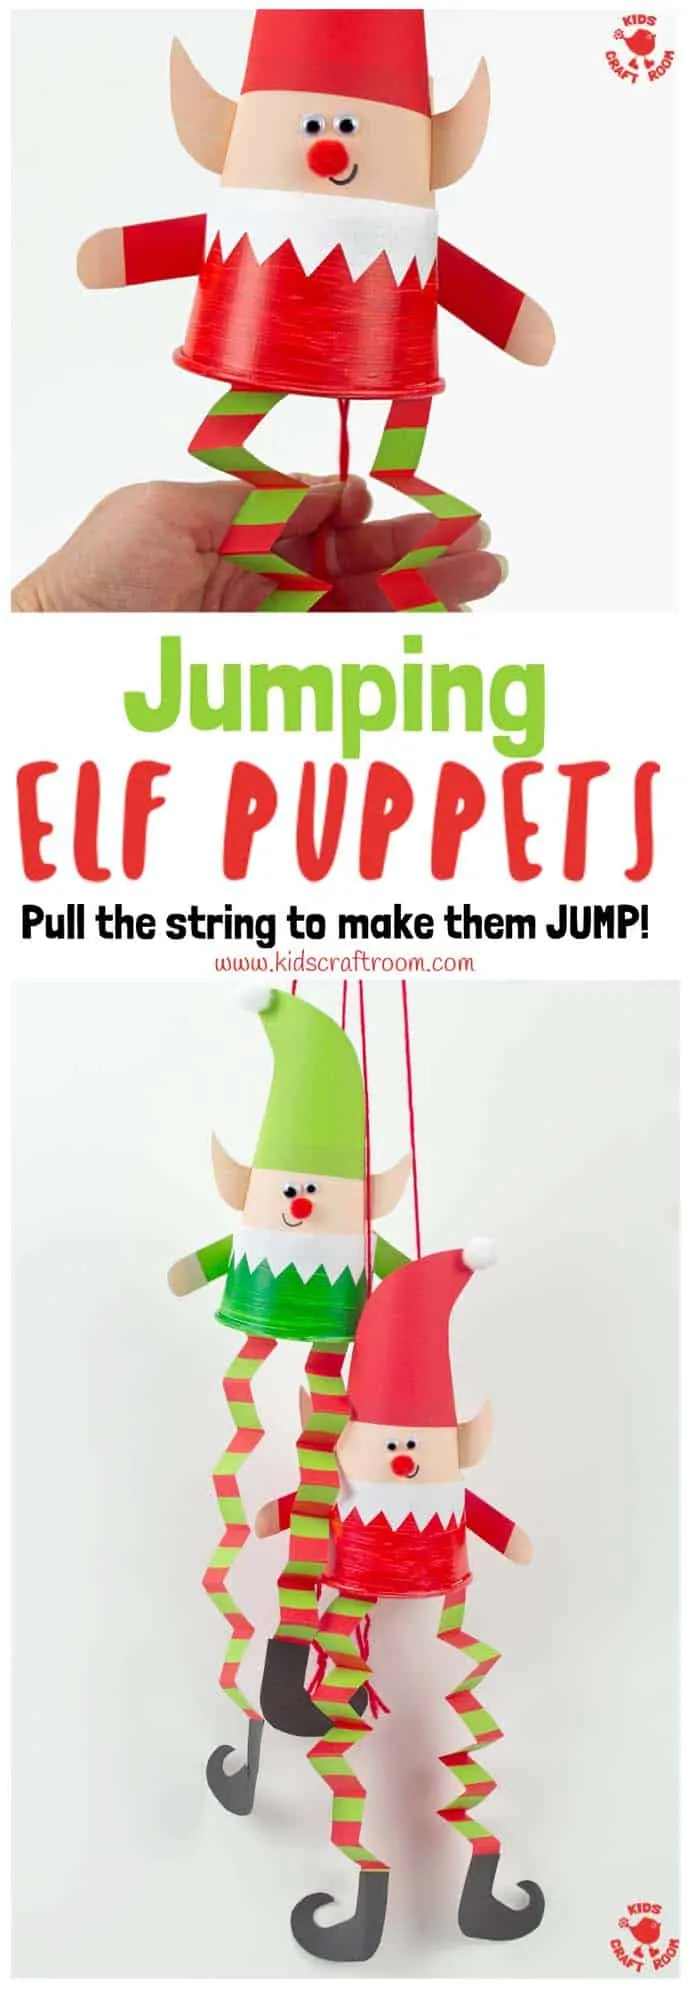 A close up of a hand pulling the strings on the elf puppet.